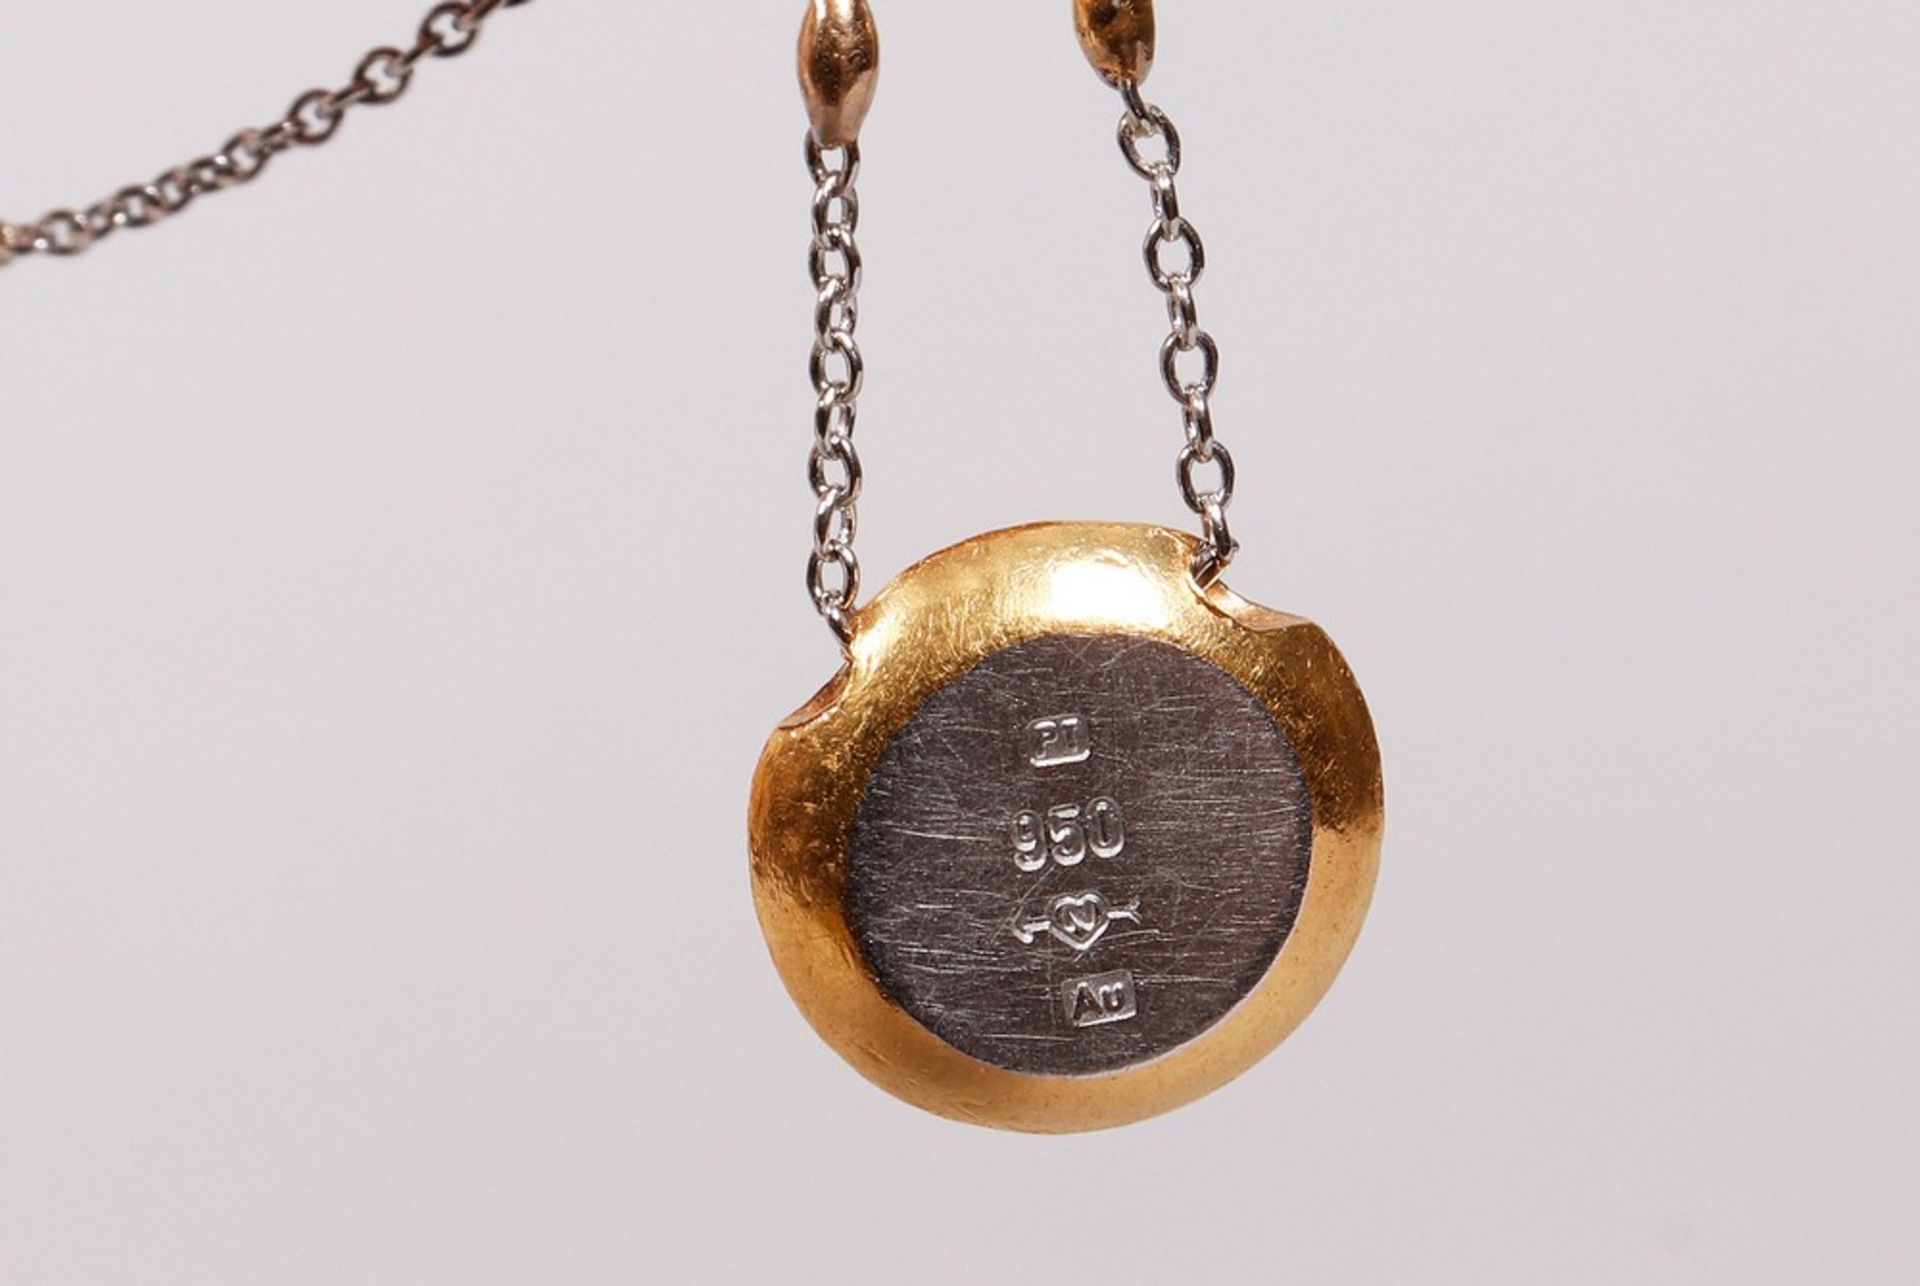 Necklace, pendant on chain, 950 platinum and fine gold, Niessing - Image 4 of 4